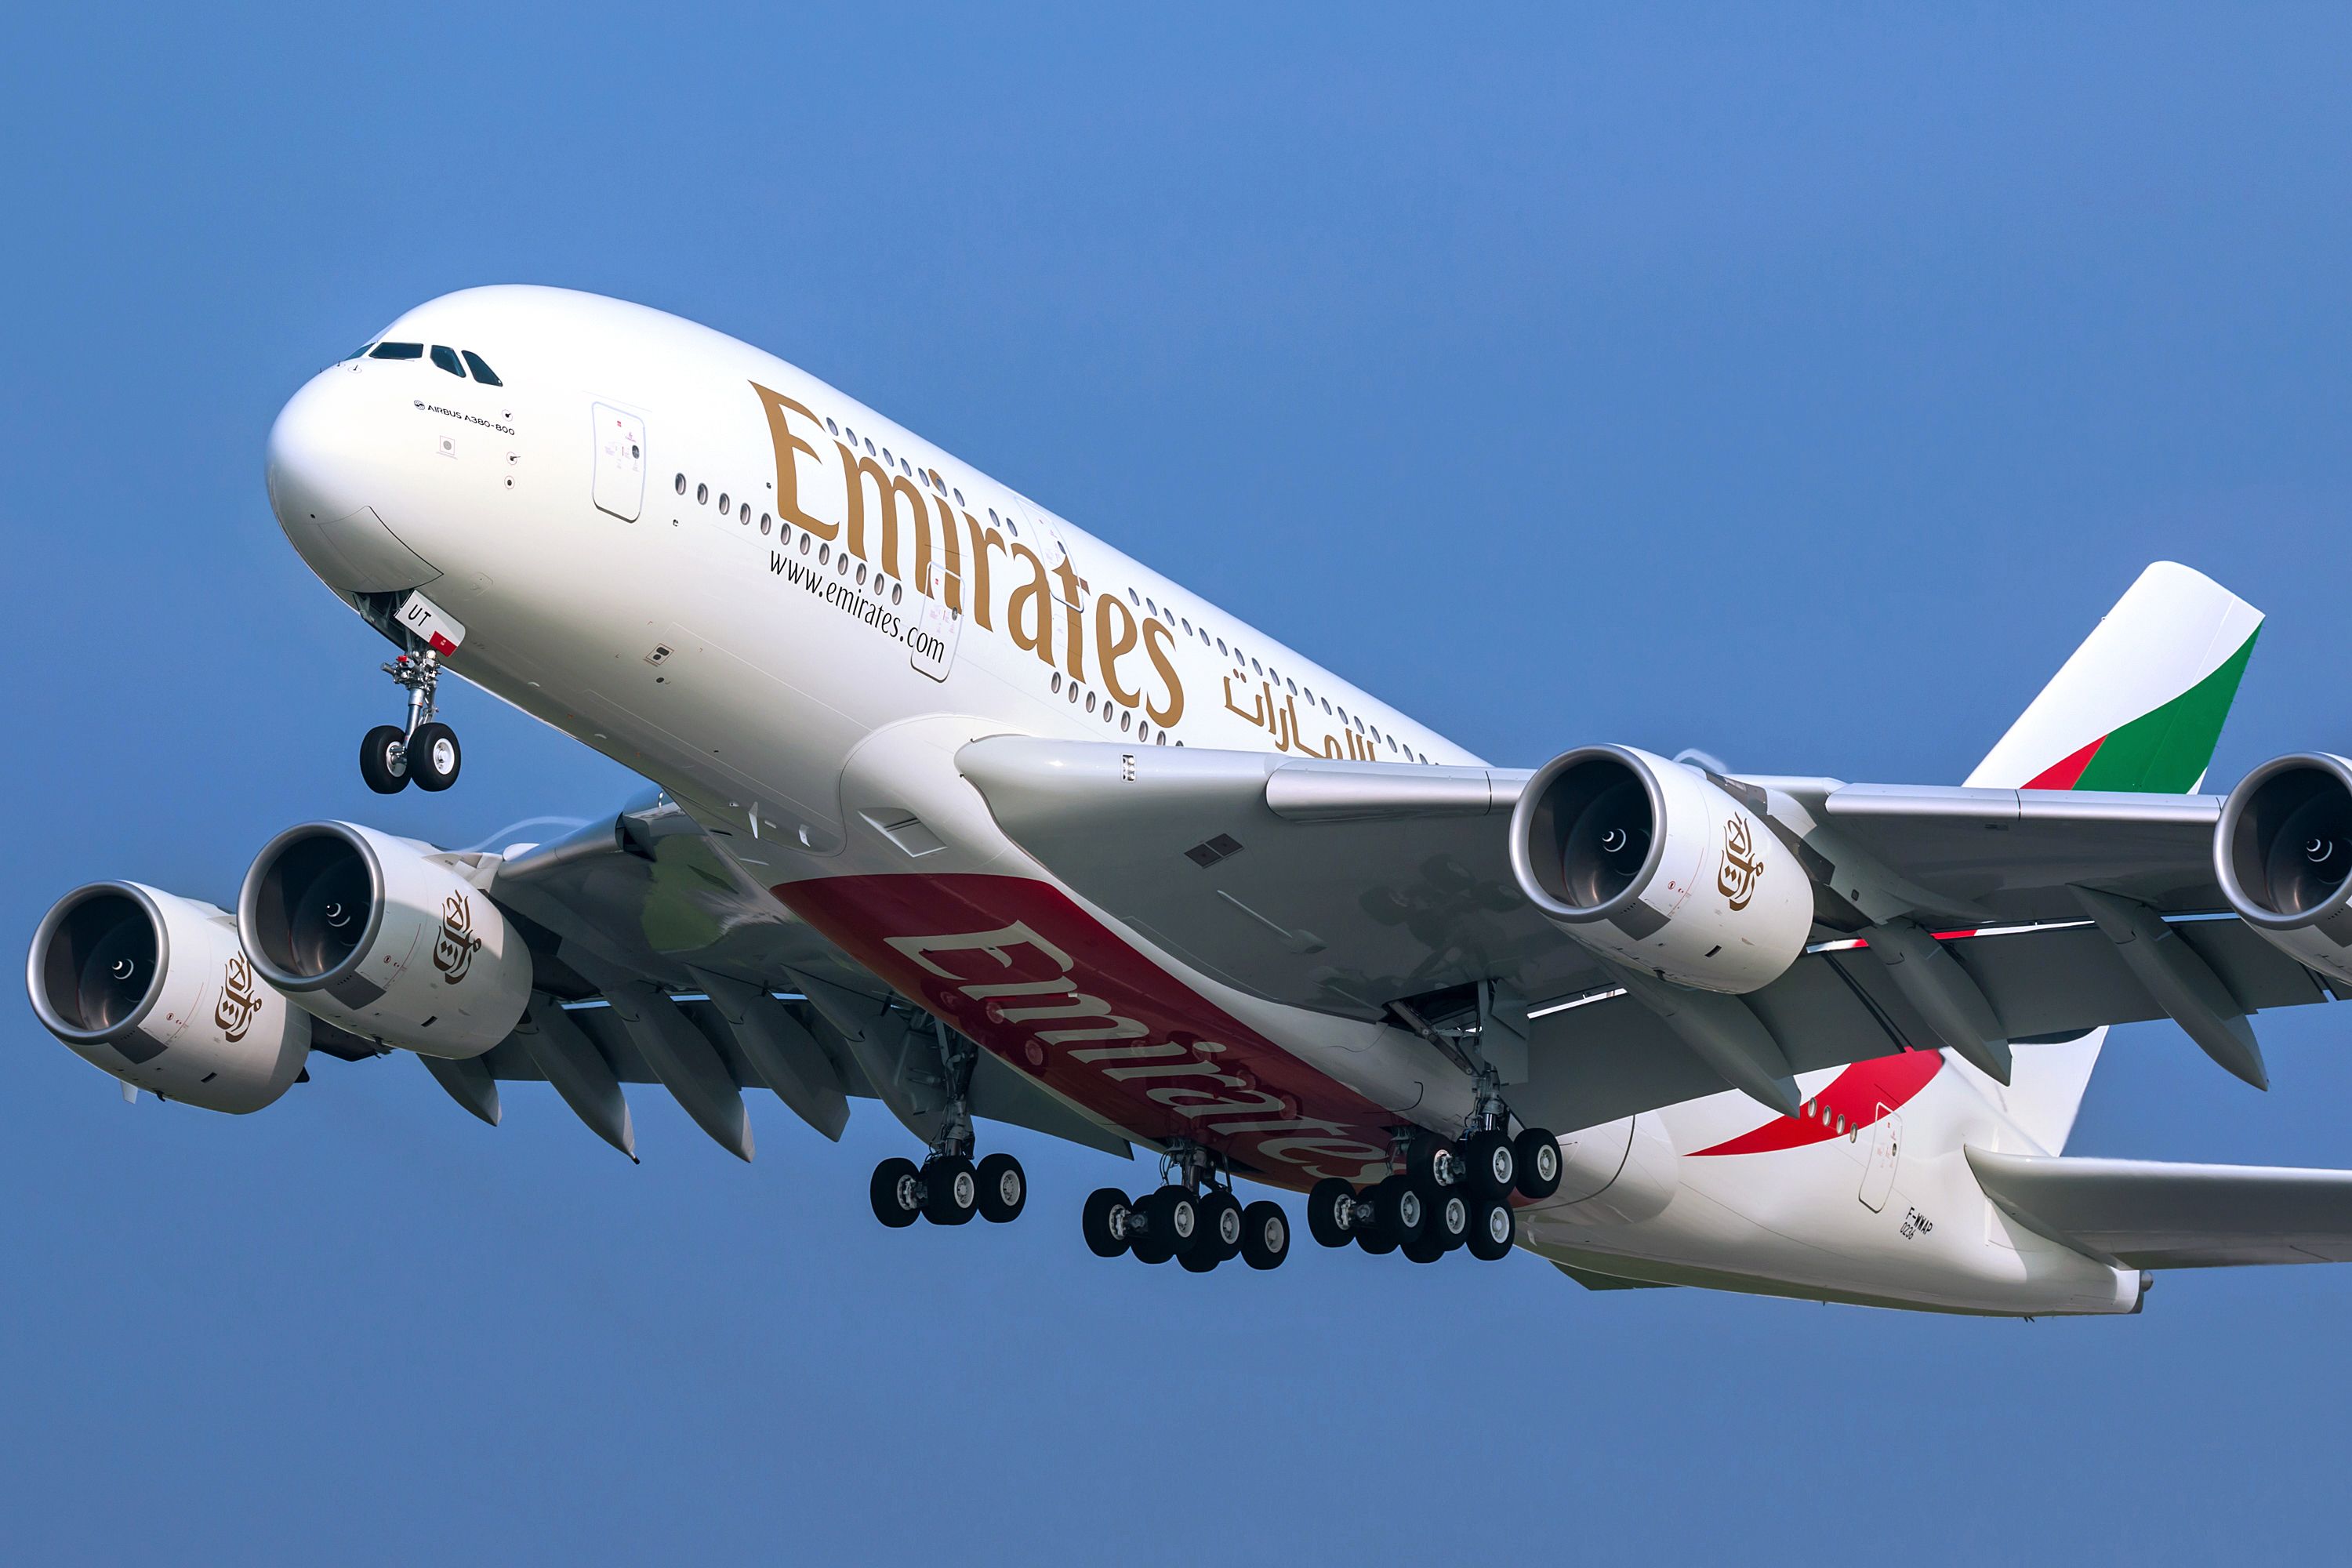 An Emirates Airbus A380 flying in the sky.